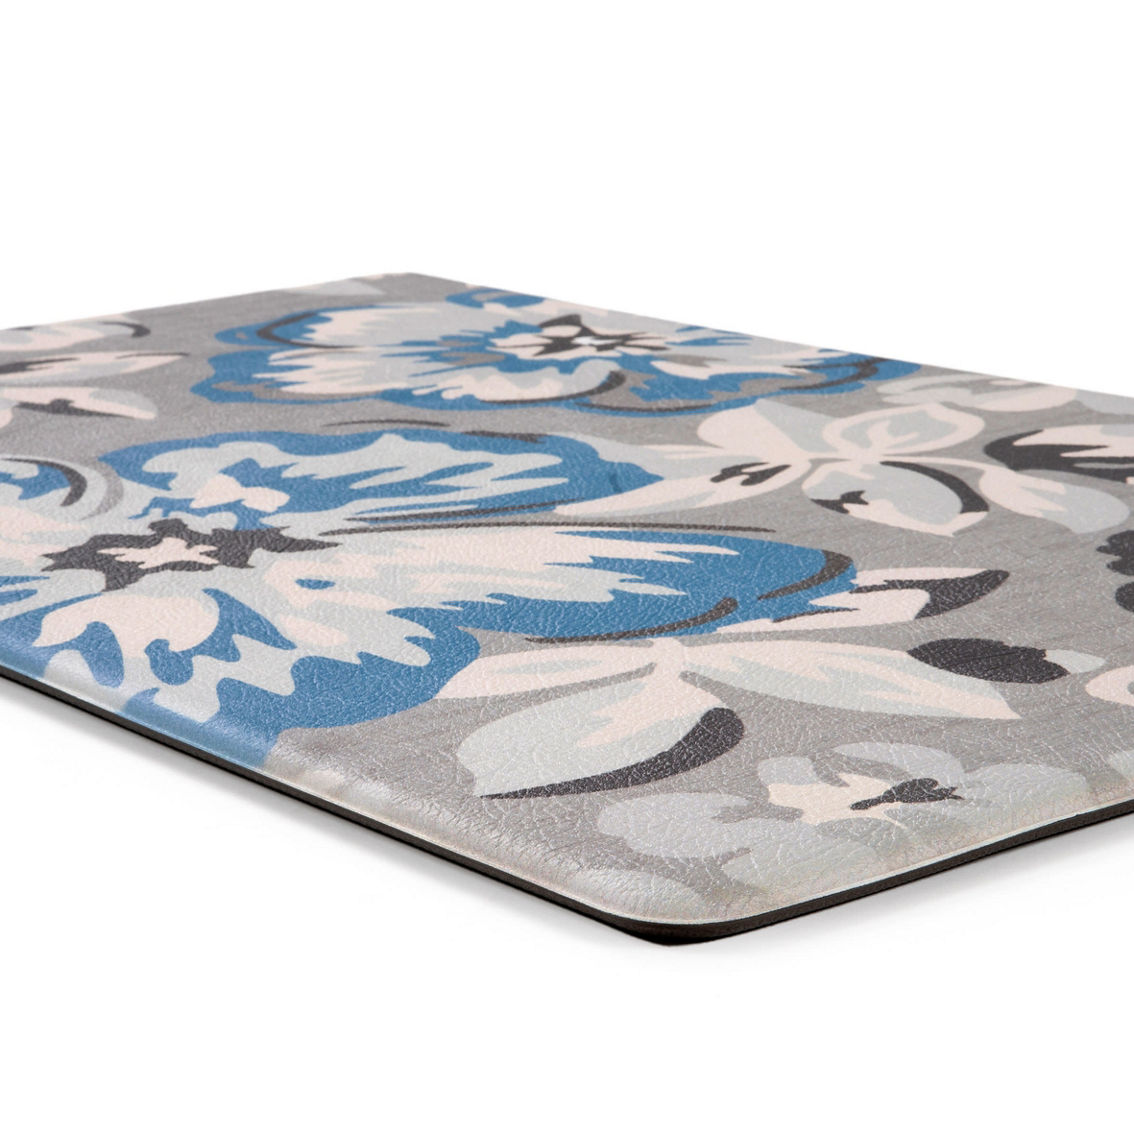 World Rug Gallery Modern Floral Anti Fatigue Standing Mat - Image 3 of 5